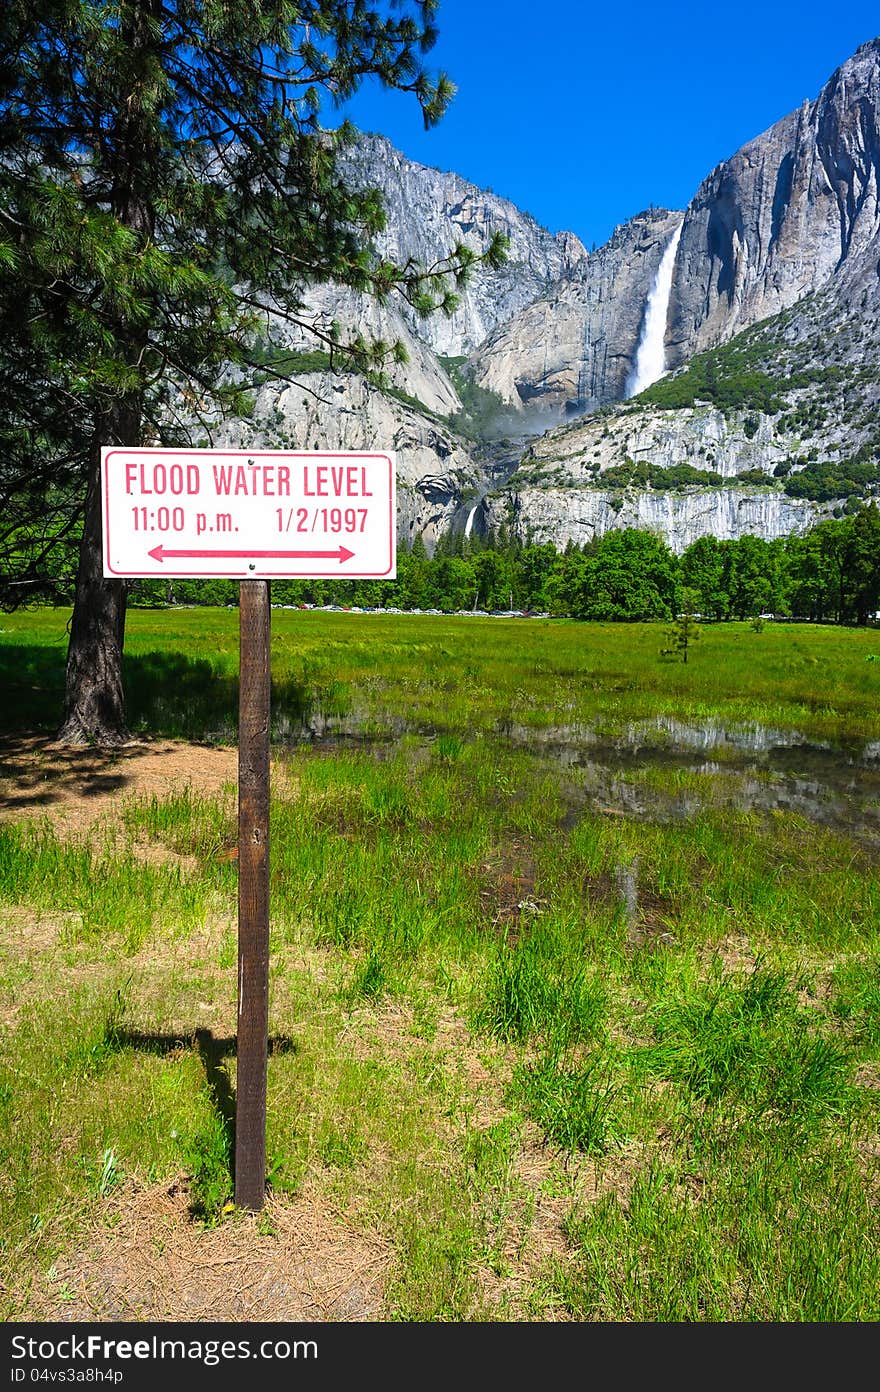 Landscape with Flood Water Level sign on the front and mountains and waterfall on the back. Landscape with Flood Water Level sign on the front and mountains and waterfall on the back.